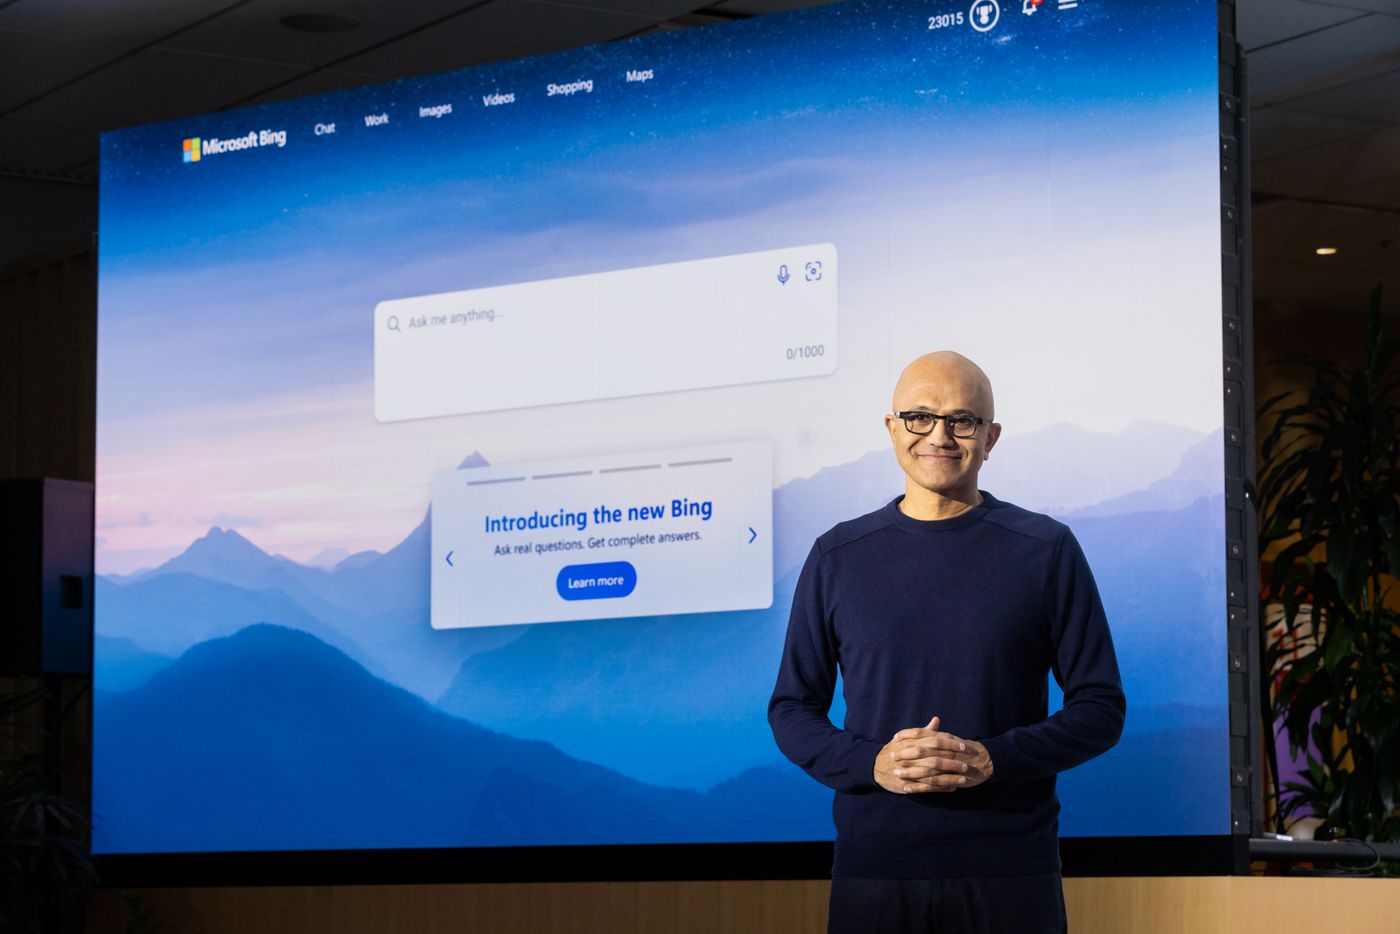 microsoft, how a windows shake-up could position microsoft to capitalize on ai pcs